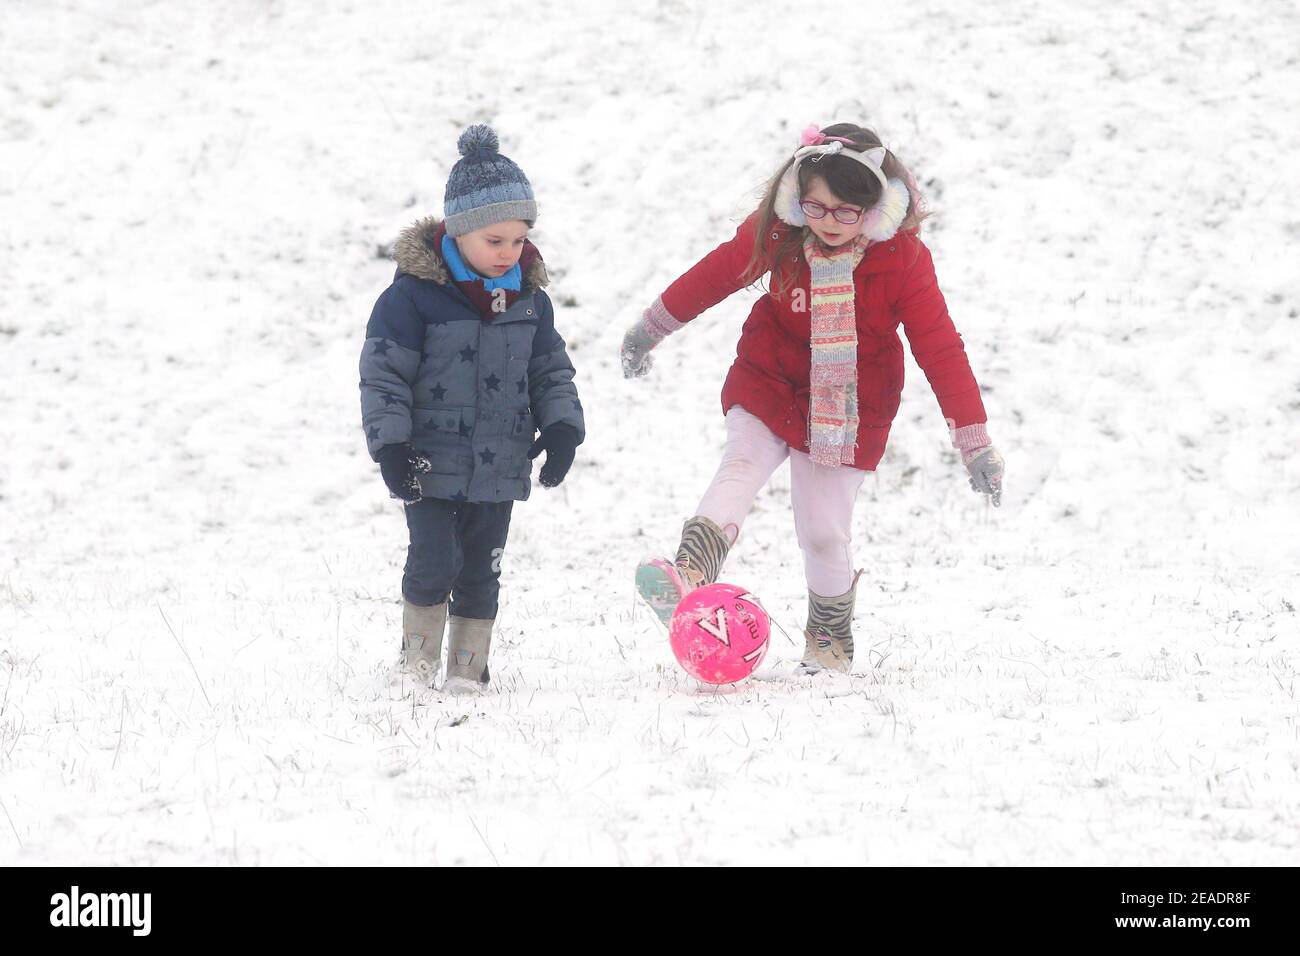 Haverhill, Suffolk, UK. 9th February 2021. Elizabeth Mitchell with children Ivy 5 and Albert 3 have fun playing football after the heavy snowfall. Stock Photo